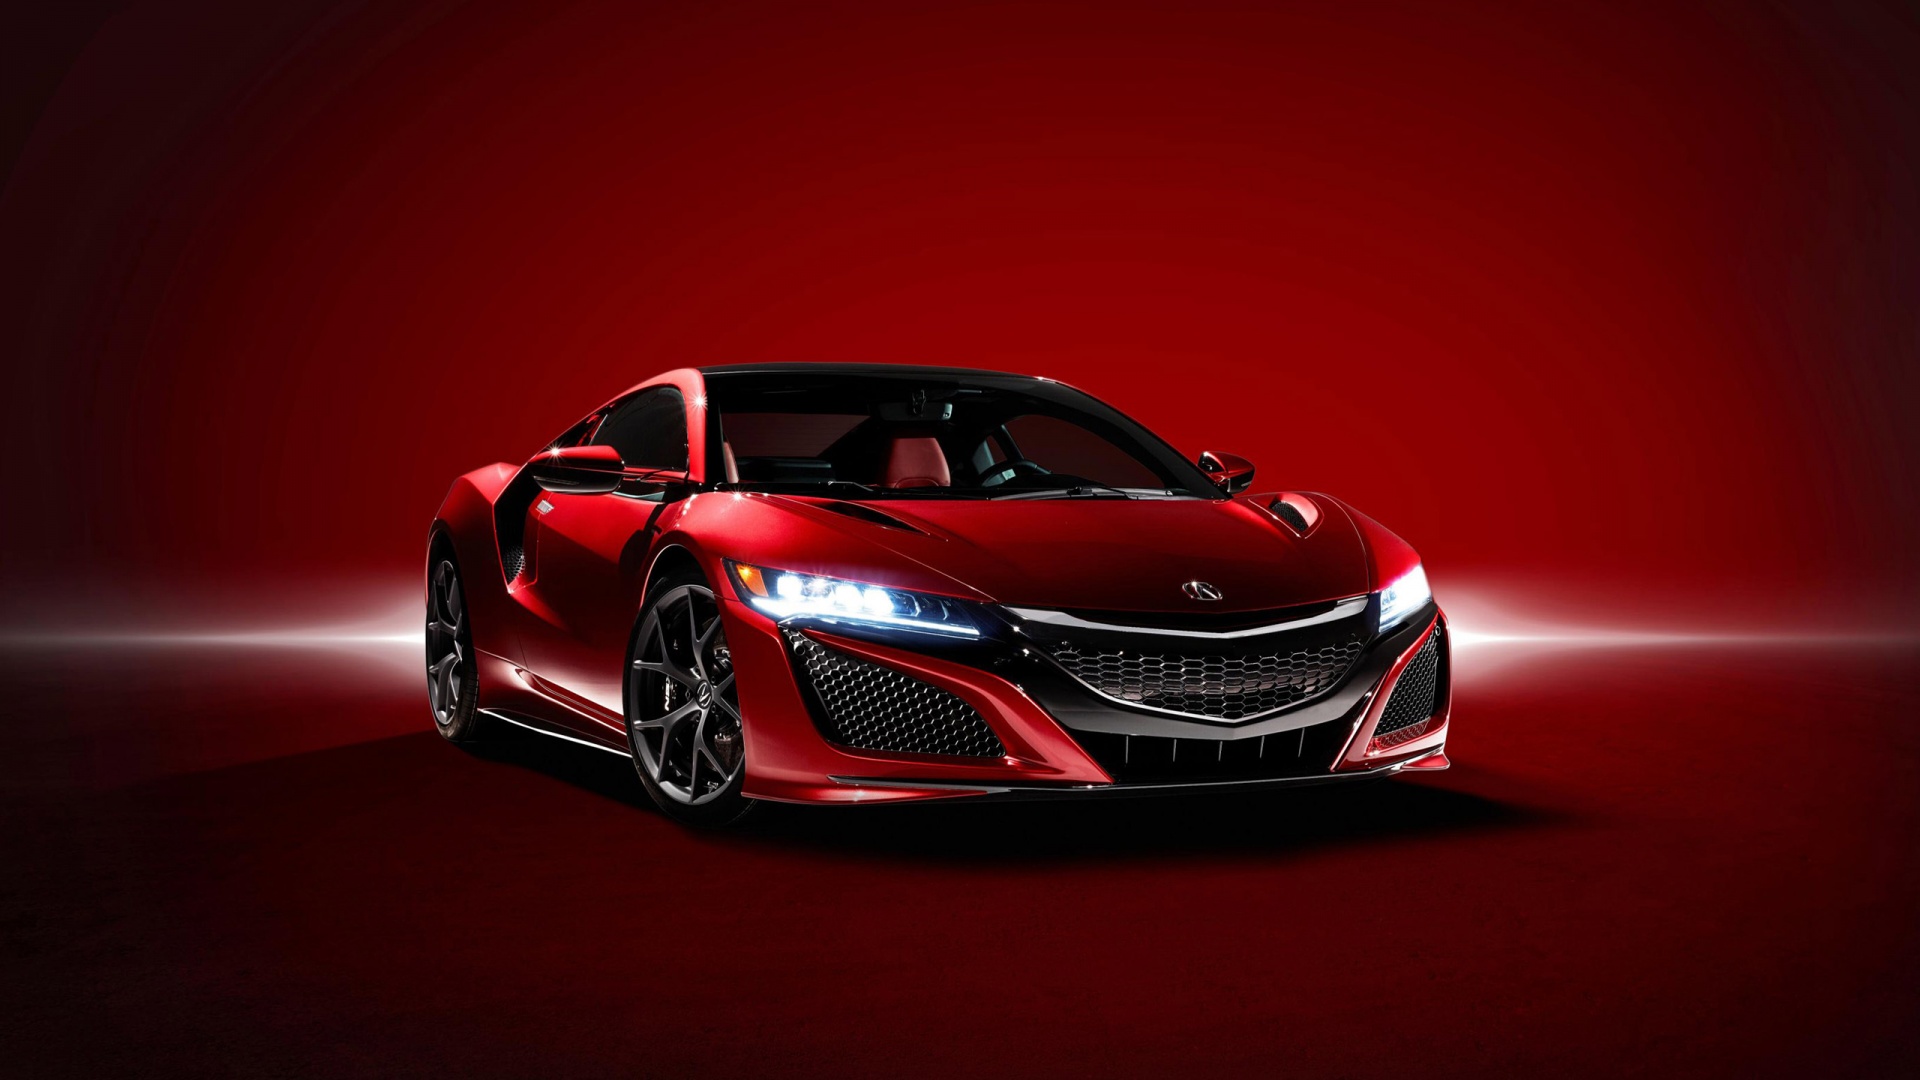 acura nsx wallpapers hd A15 2016